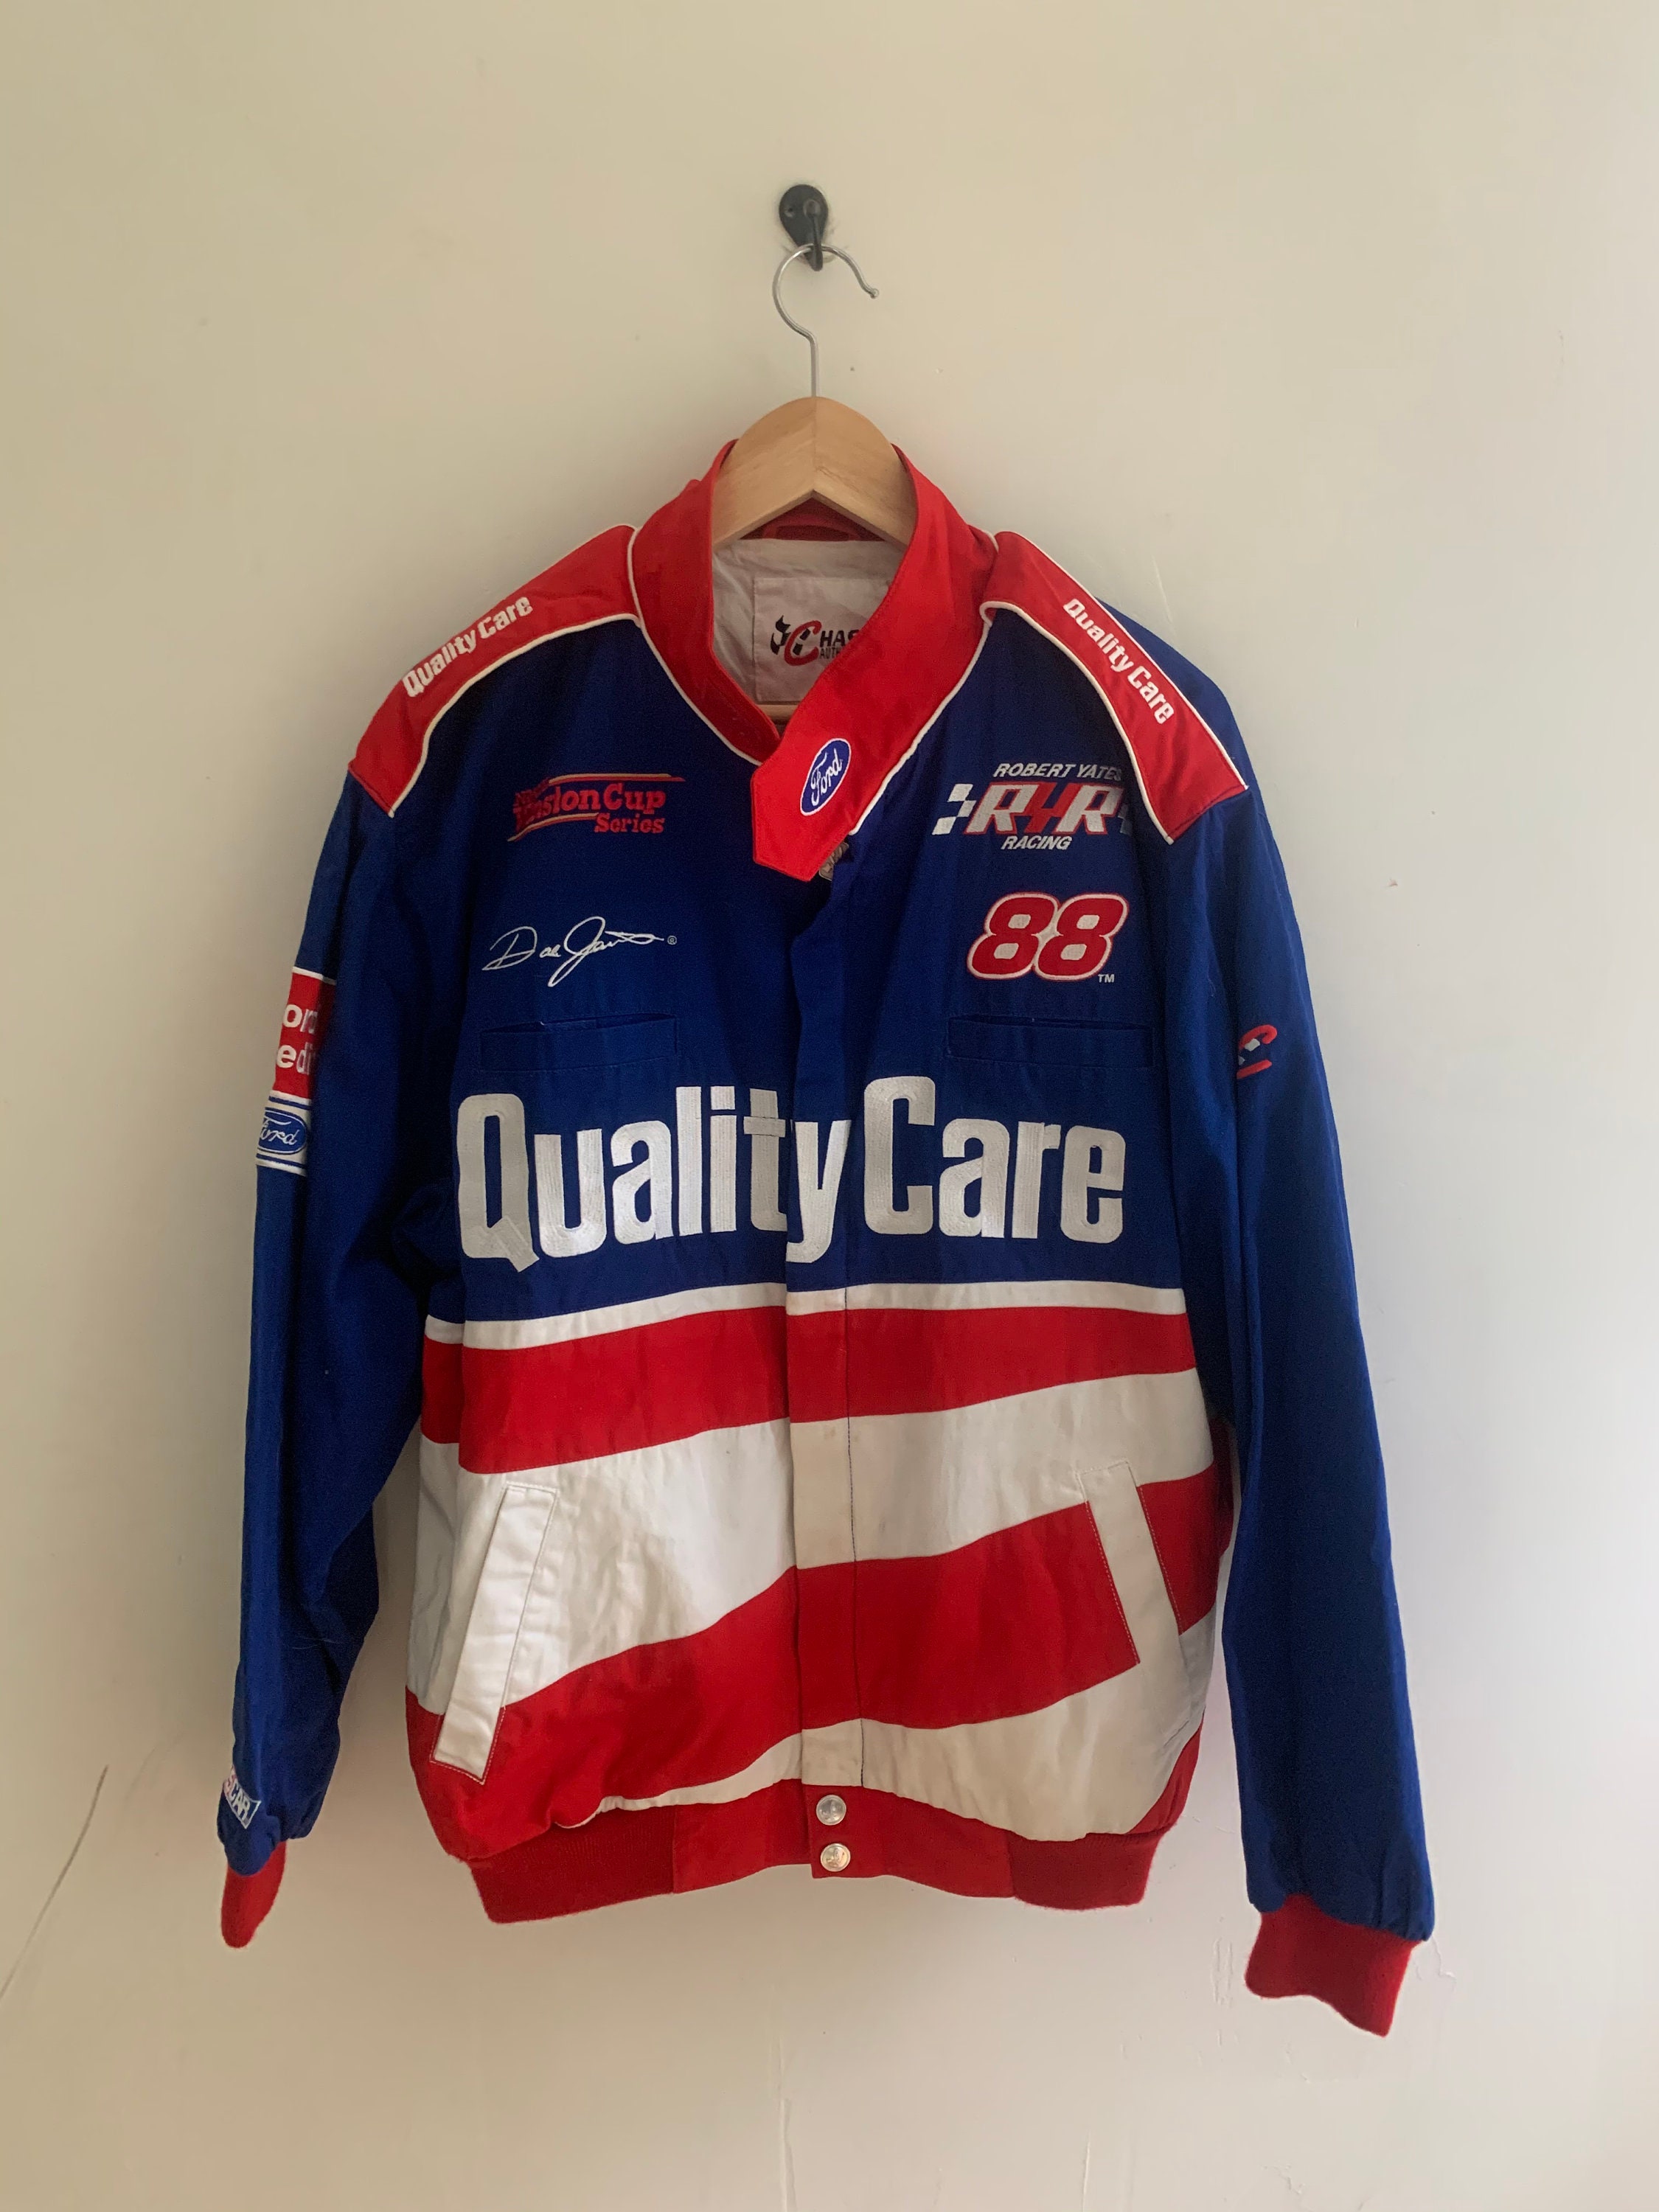 Vintage Nascar Jacket 90s Ford Quality Care Racing USA 88 | Etsy